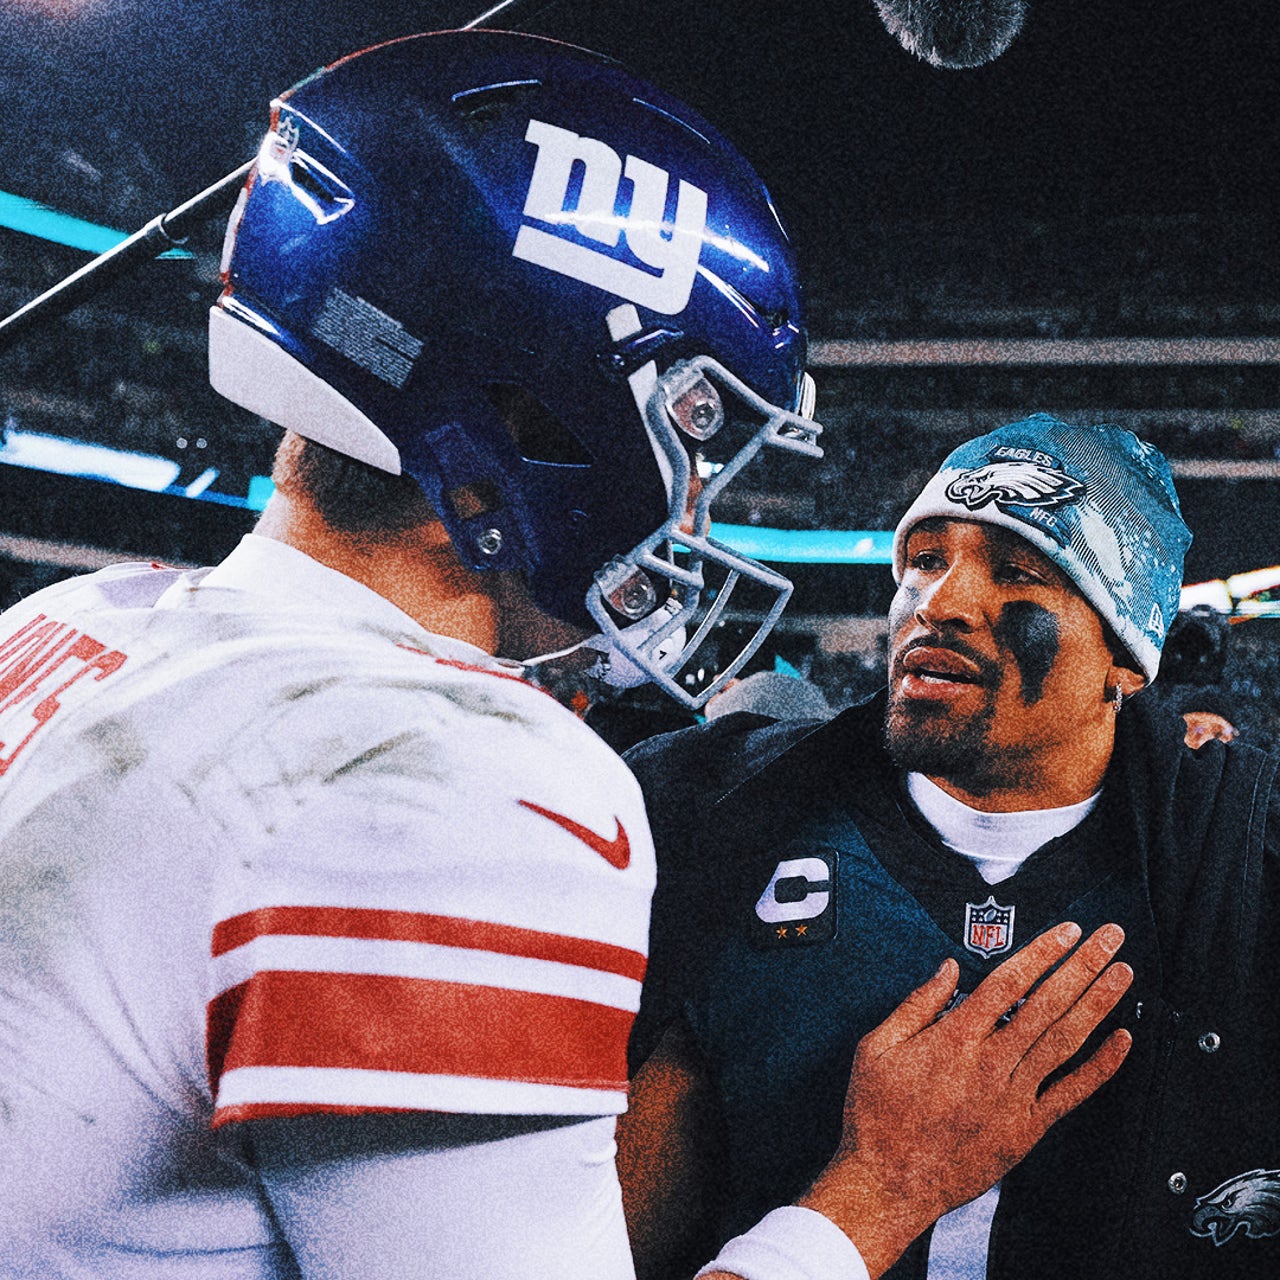 Giants, Eagles renewing rivalry in Christmas Day game on FOX